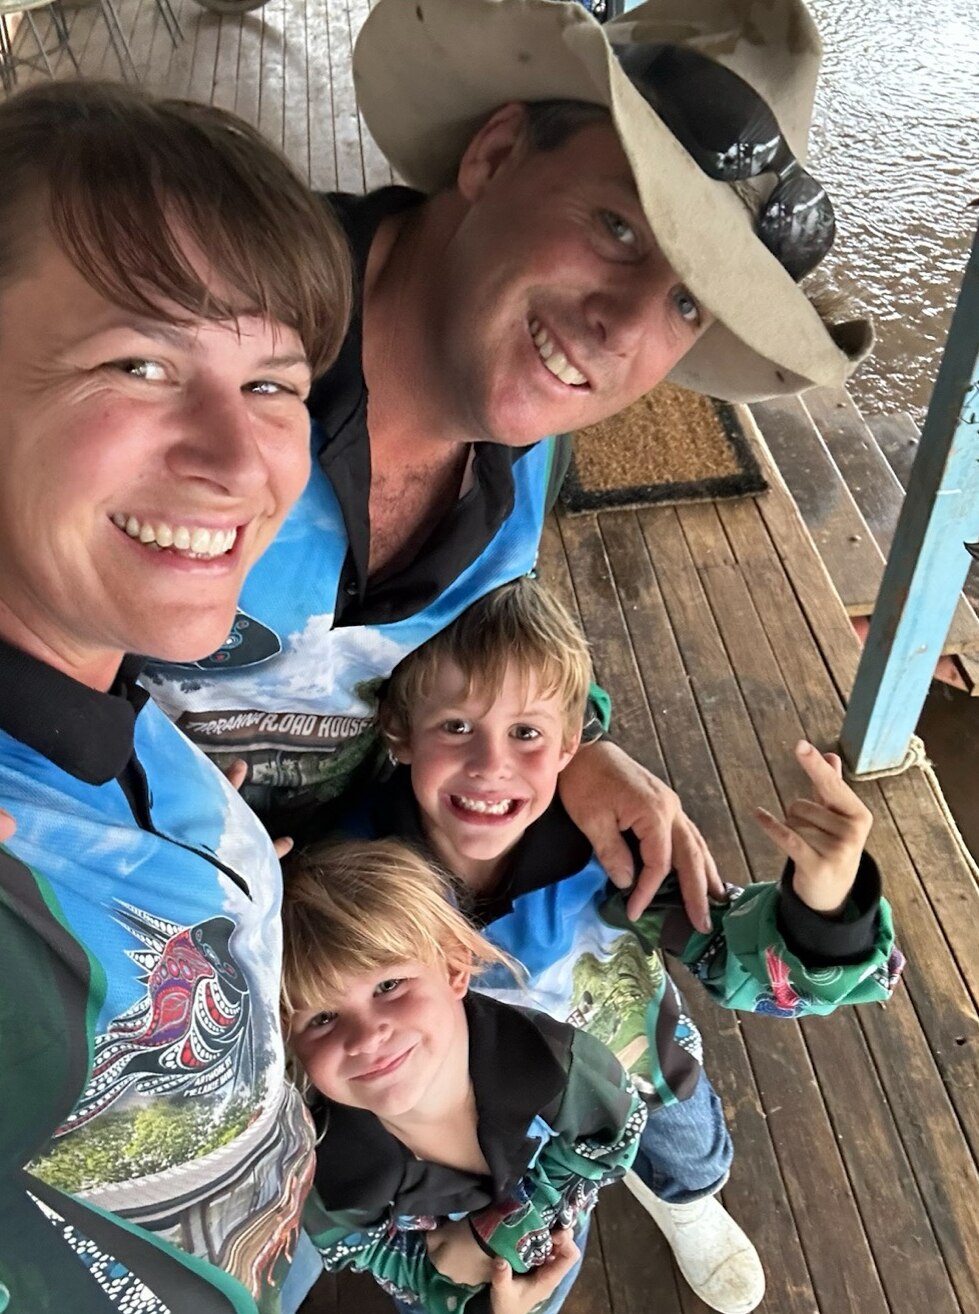 A mum, dad and young son and daughter wear fishing shirts and smile directly at the camera